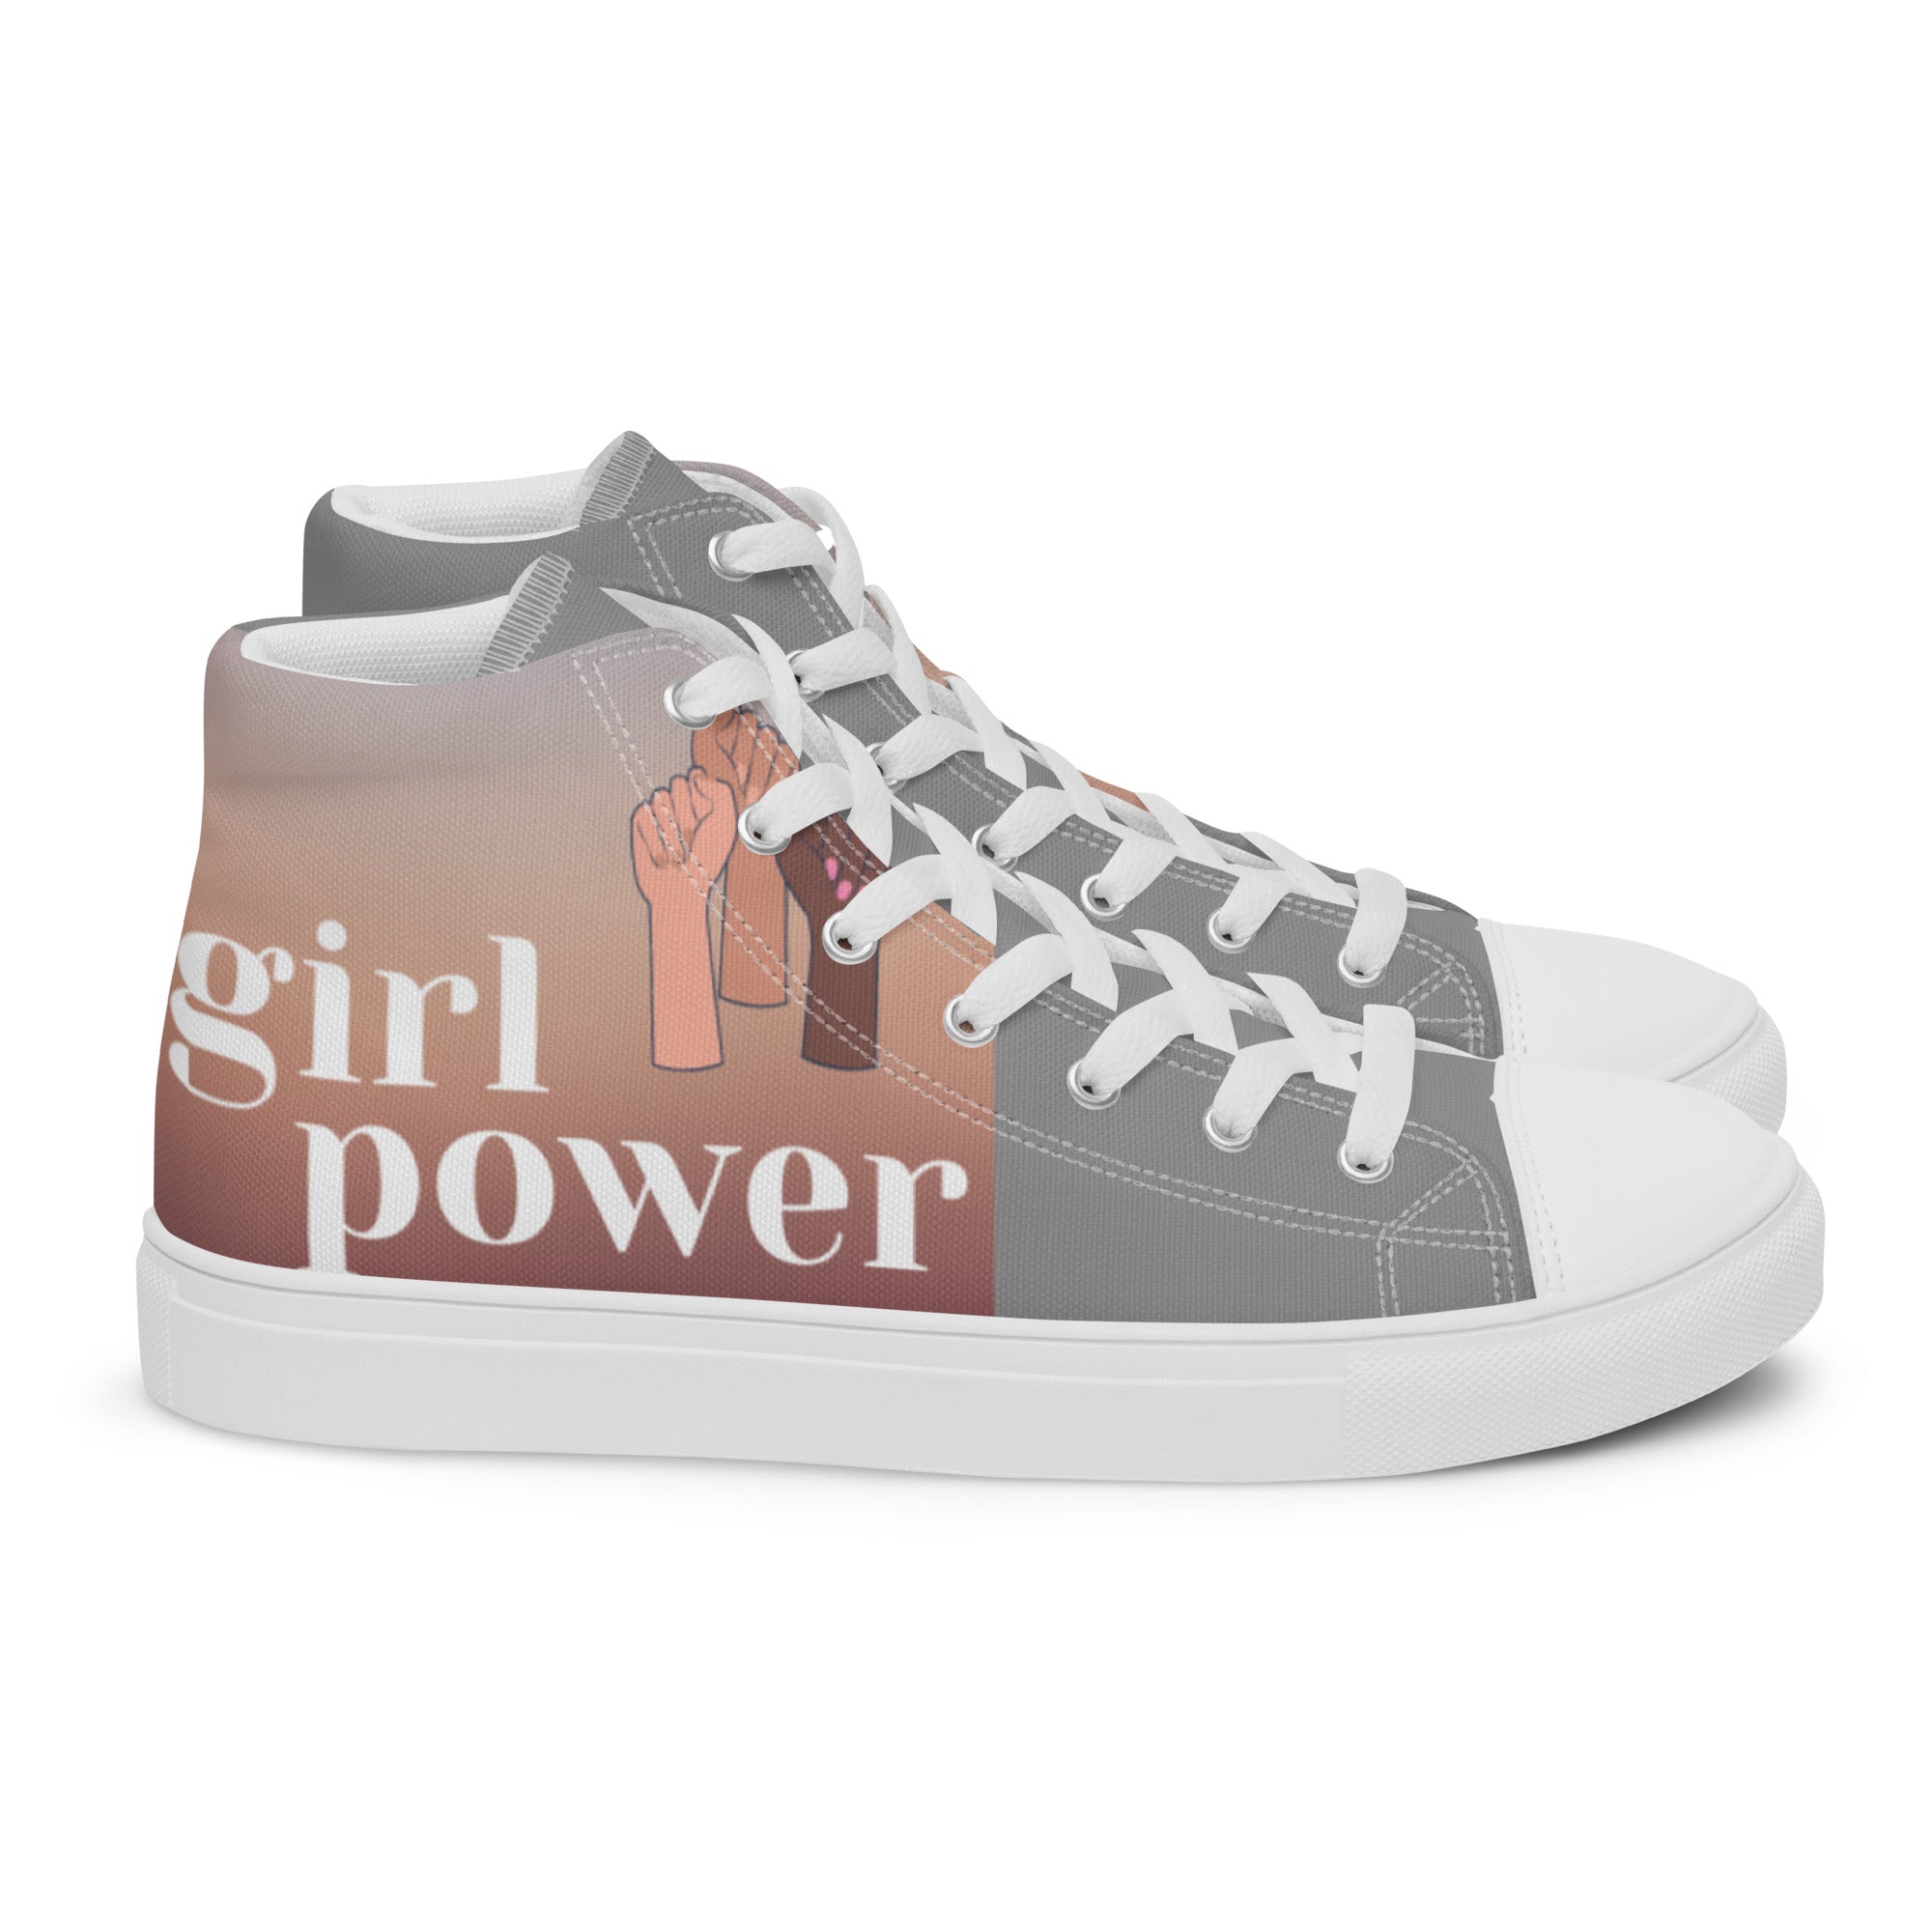 Girl Power high top canvas shoes - pink/gray